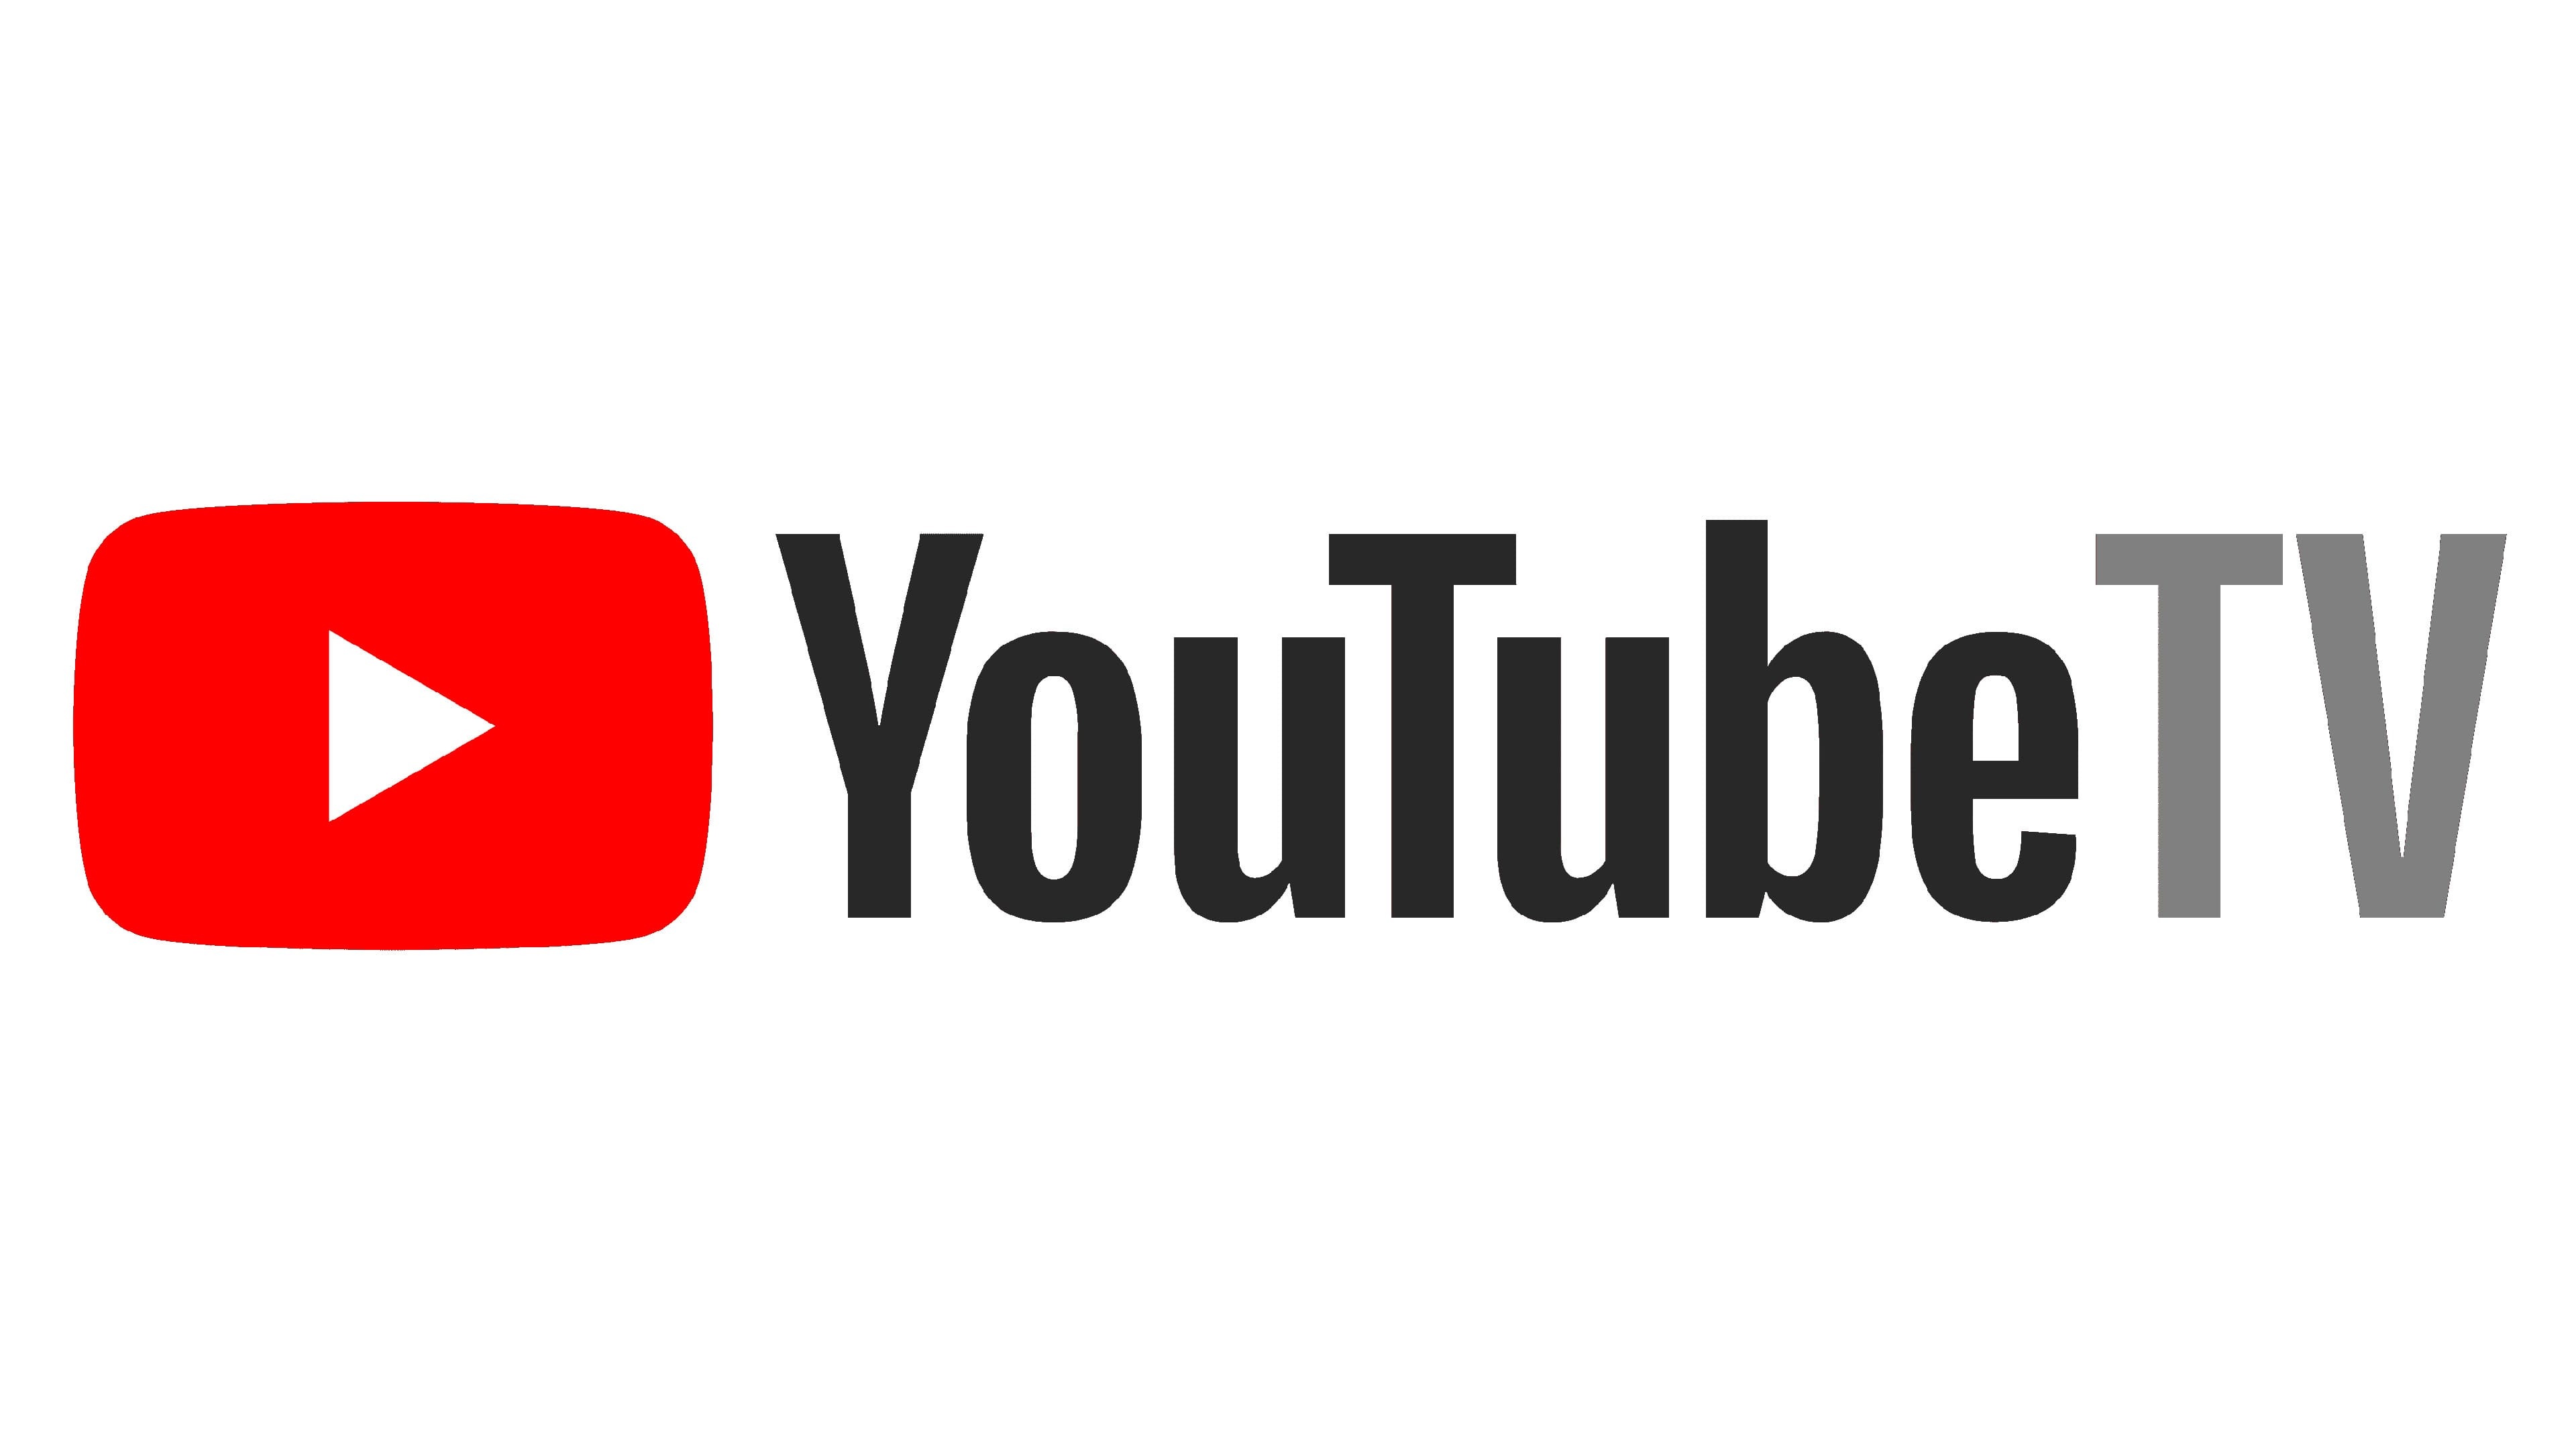 YouTube: The site founded by three former PayPal employees Steve Chen, Chad Hurley, and Jawed Karim. 3840x2160 4K Wallpaper.